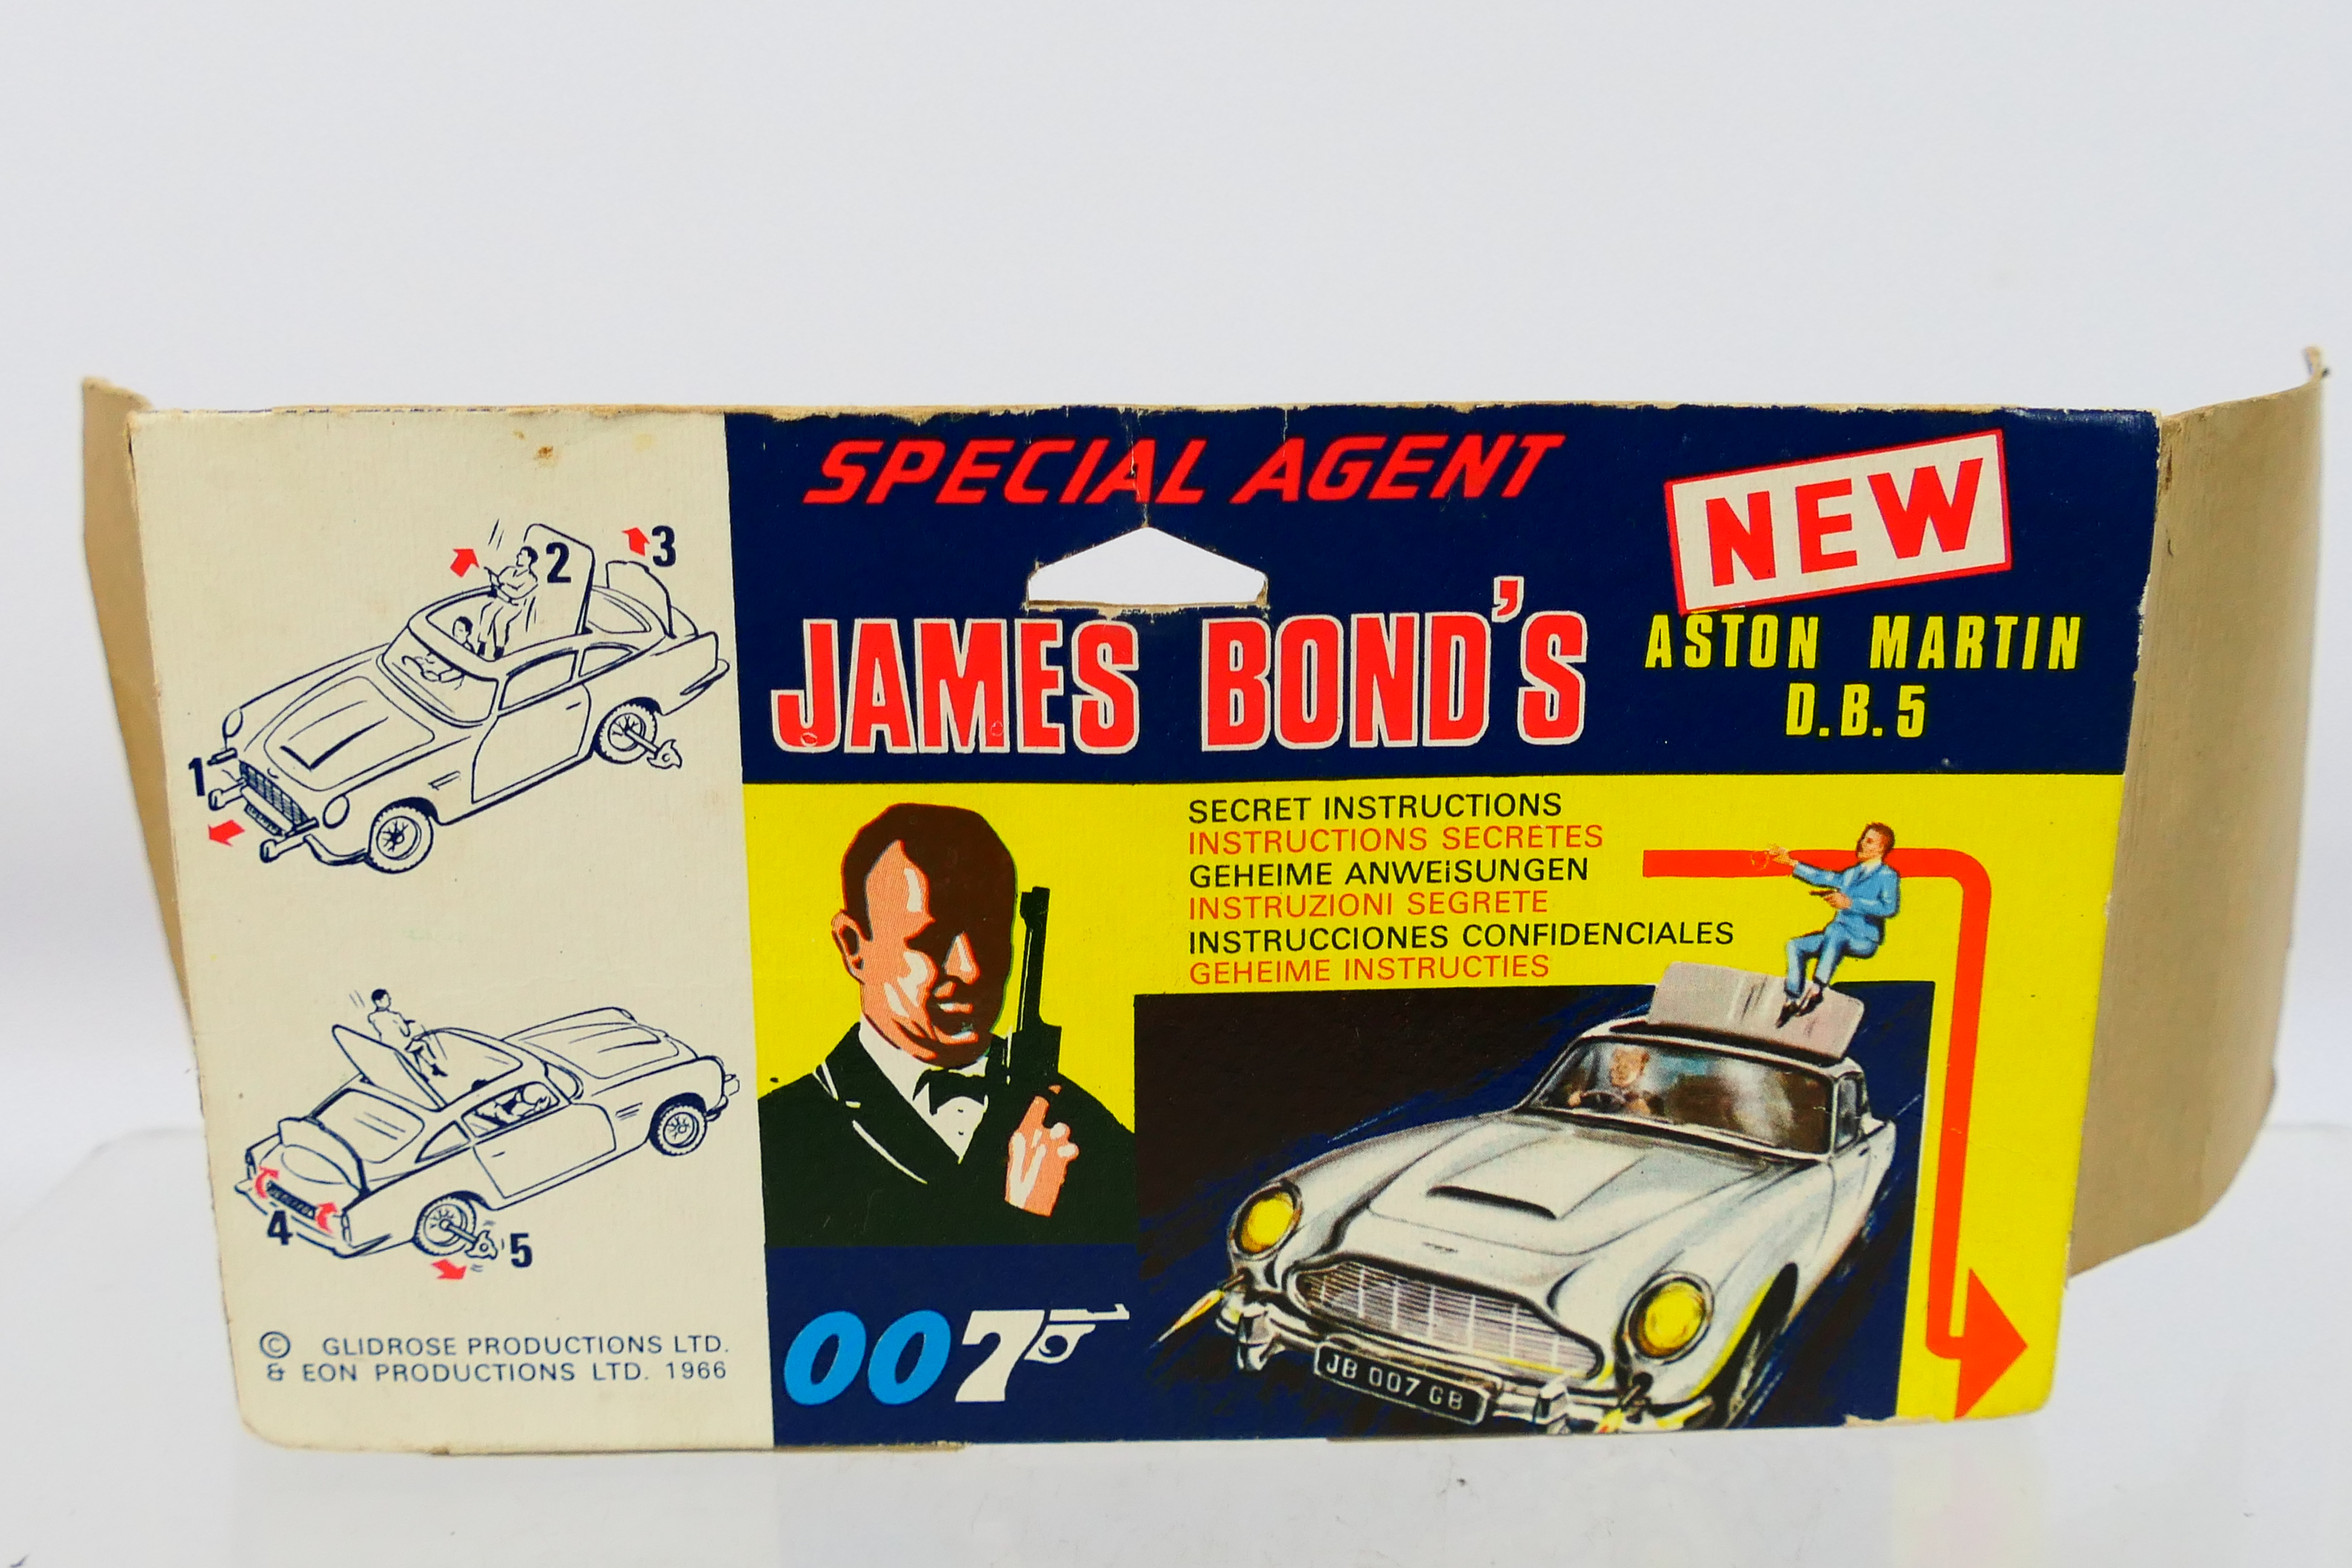 Corgi - James Bond - An unopened 007 Aston Martin DB5 in the early pictorial wing flap packaging # - Image 6 of 8